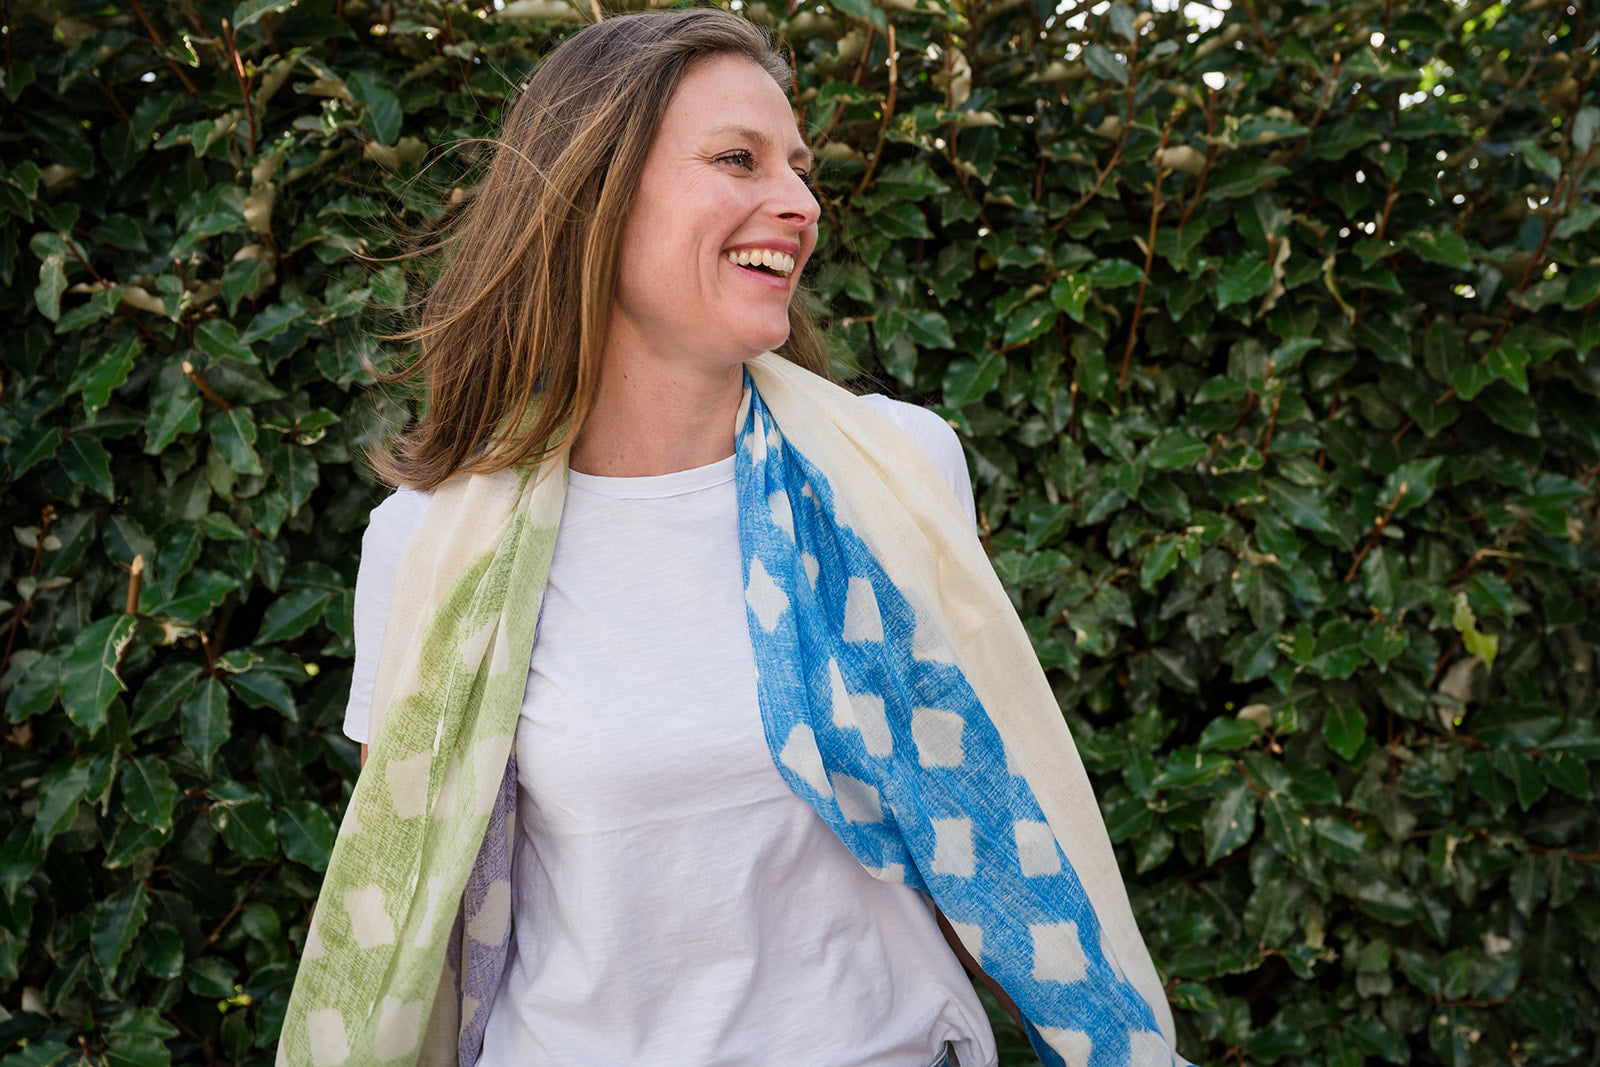 Make a statement with our lattice pattern scarf, blending bright blue, navy, purple, and lime tones. The cream center panel adds sophistication and balance to the design, while frayed edges provide texture and a casual feel. Lightweight and versatile, this scarf is the perfect accessory for adding a pop of color to any outfit. Crafted from a comfortable polyester blend.